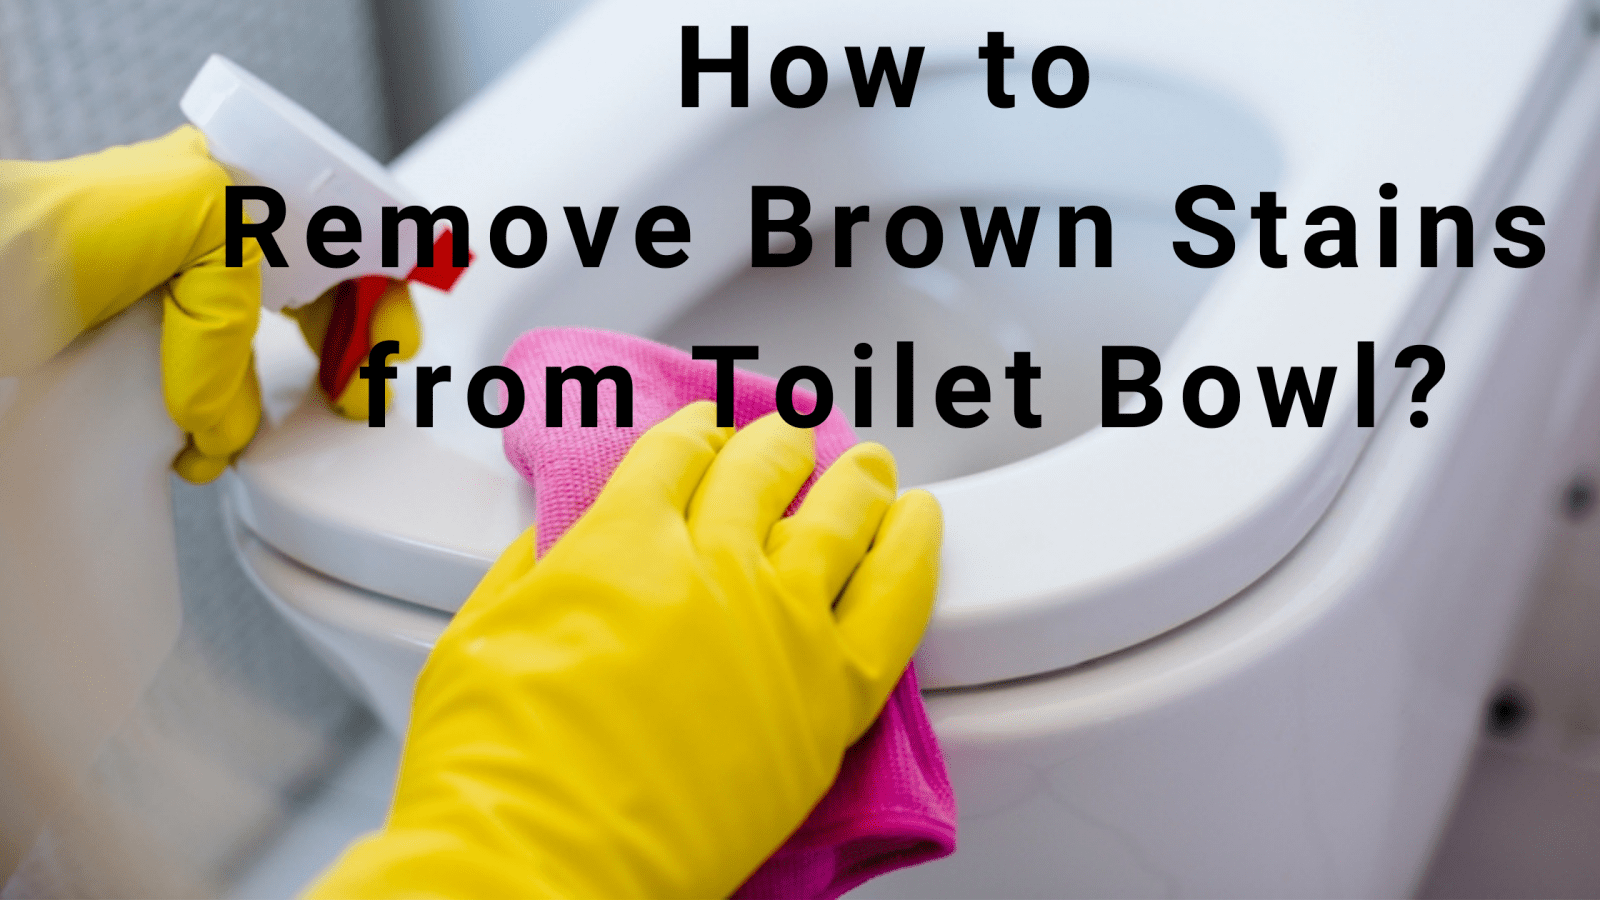 How To Remove Brown Stains From Toilet Bowl? Easy Solution!